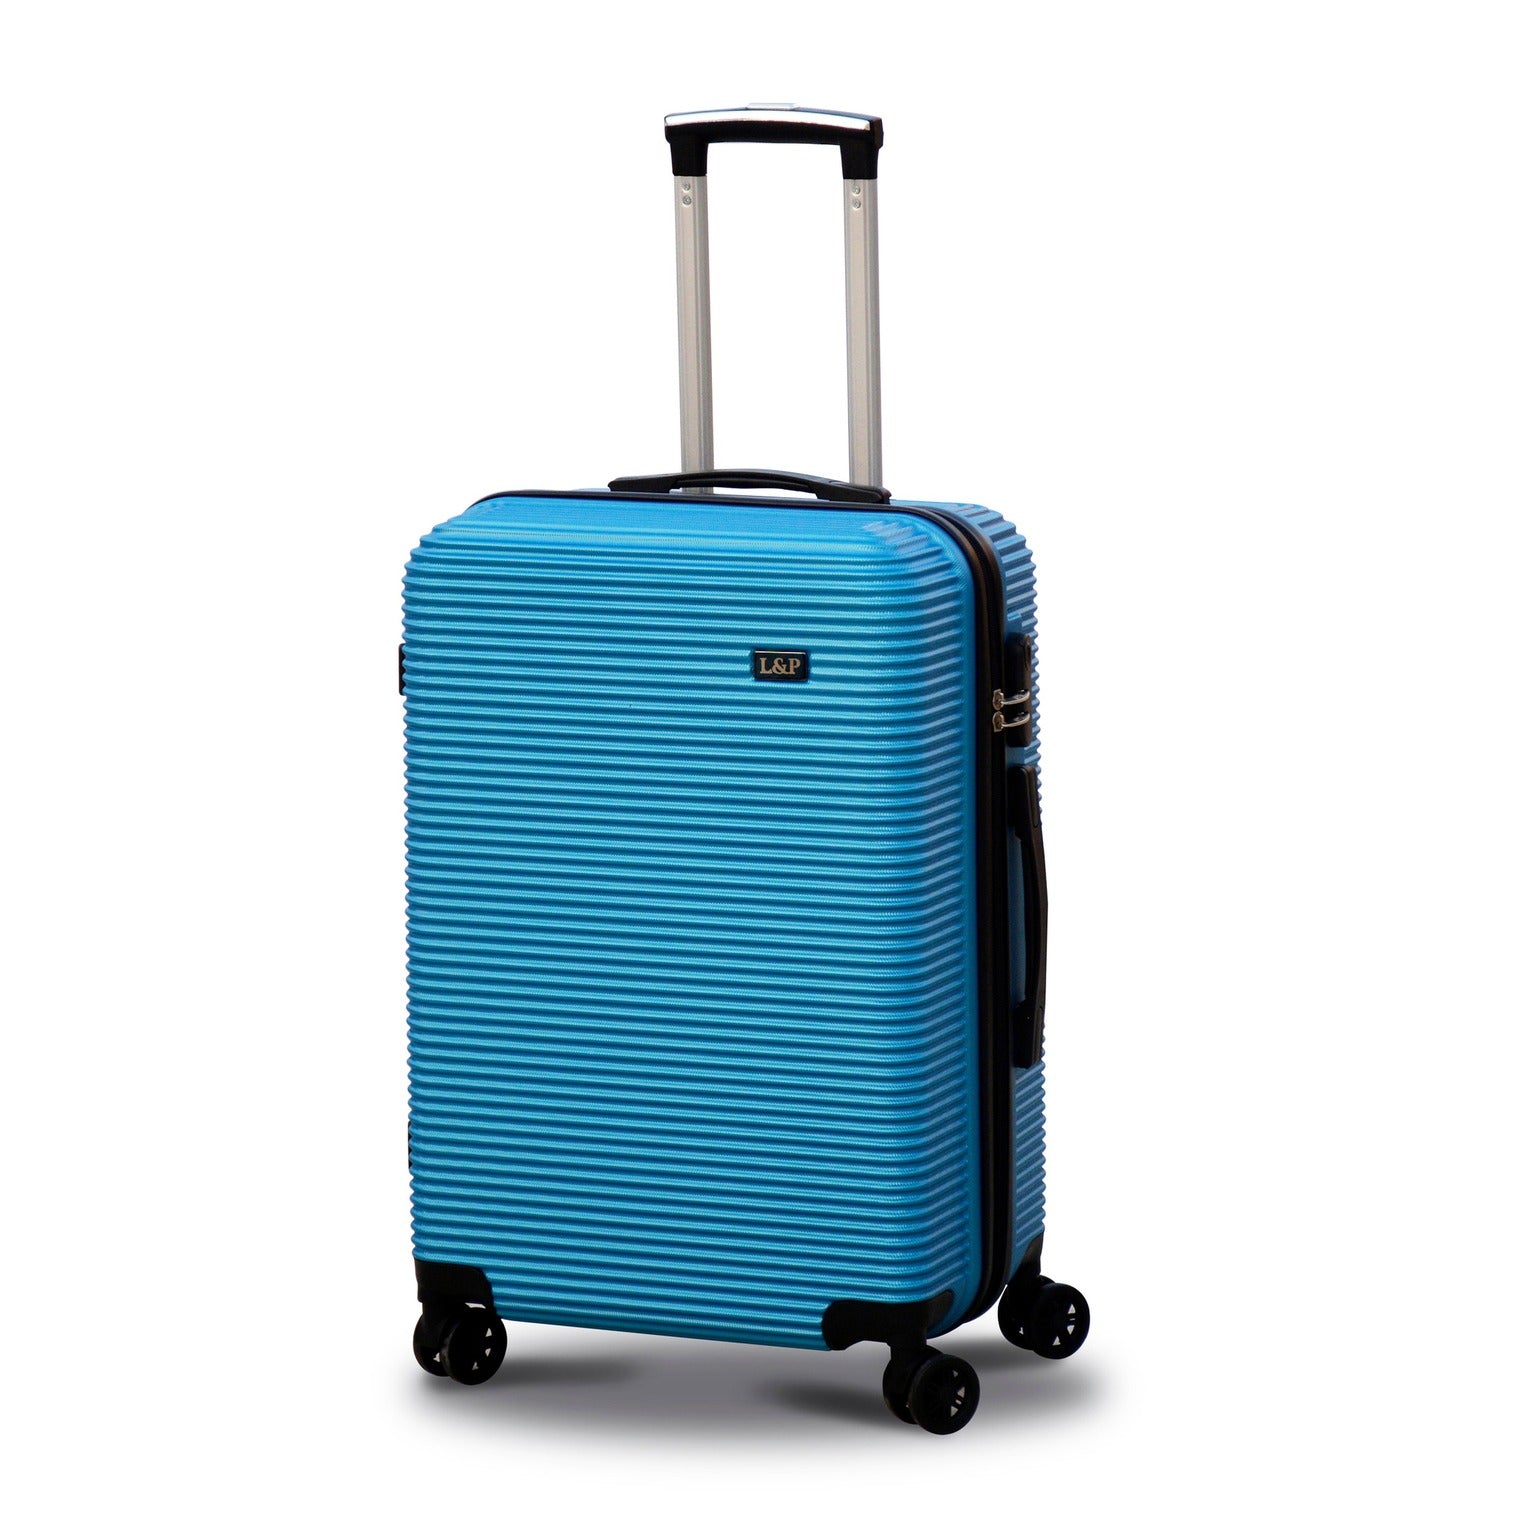 28" Light Blue Colour JIAN ABS Line Luggage Lightweight Hard Case Trolley Bag with Spinner Wheel